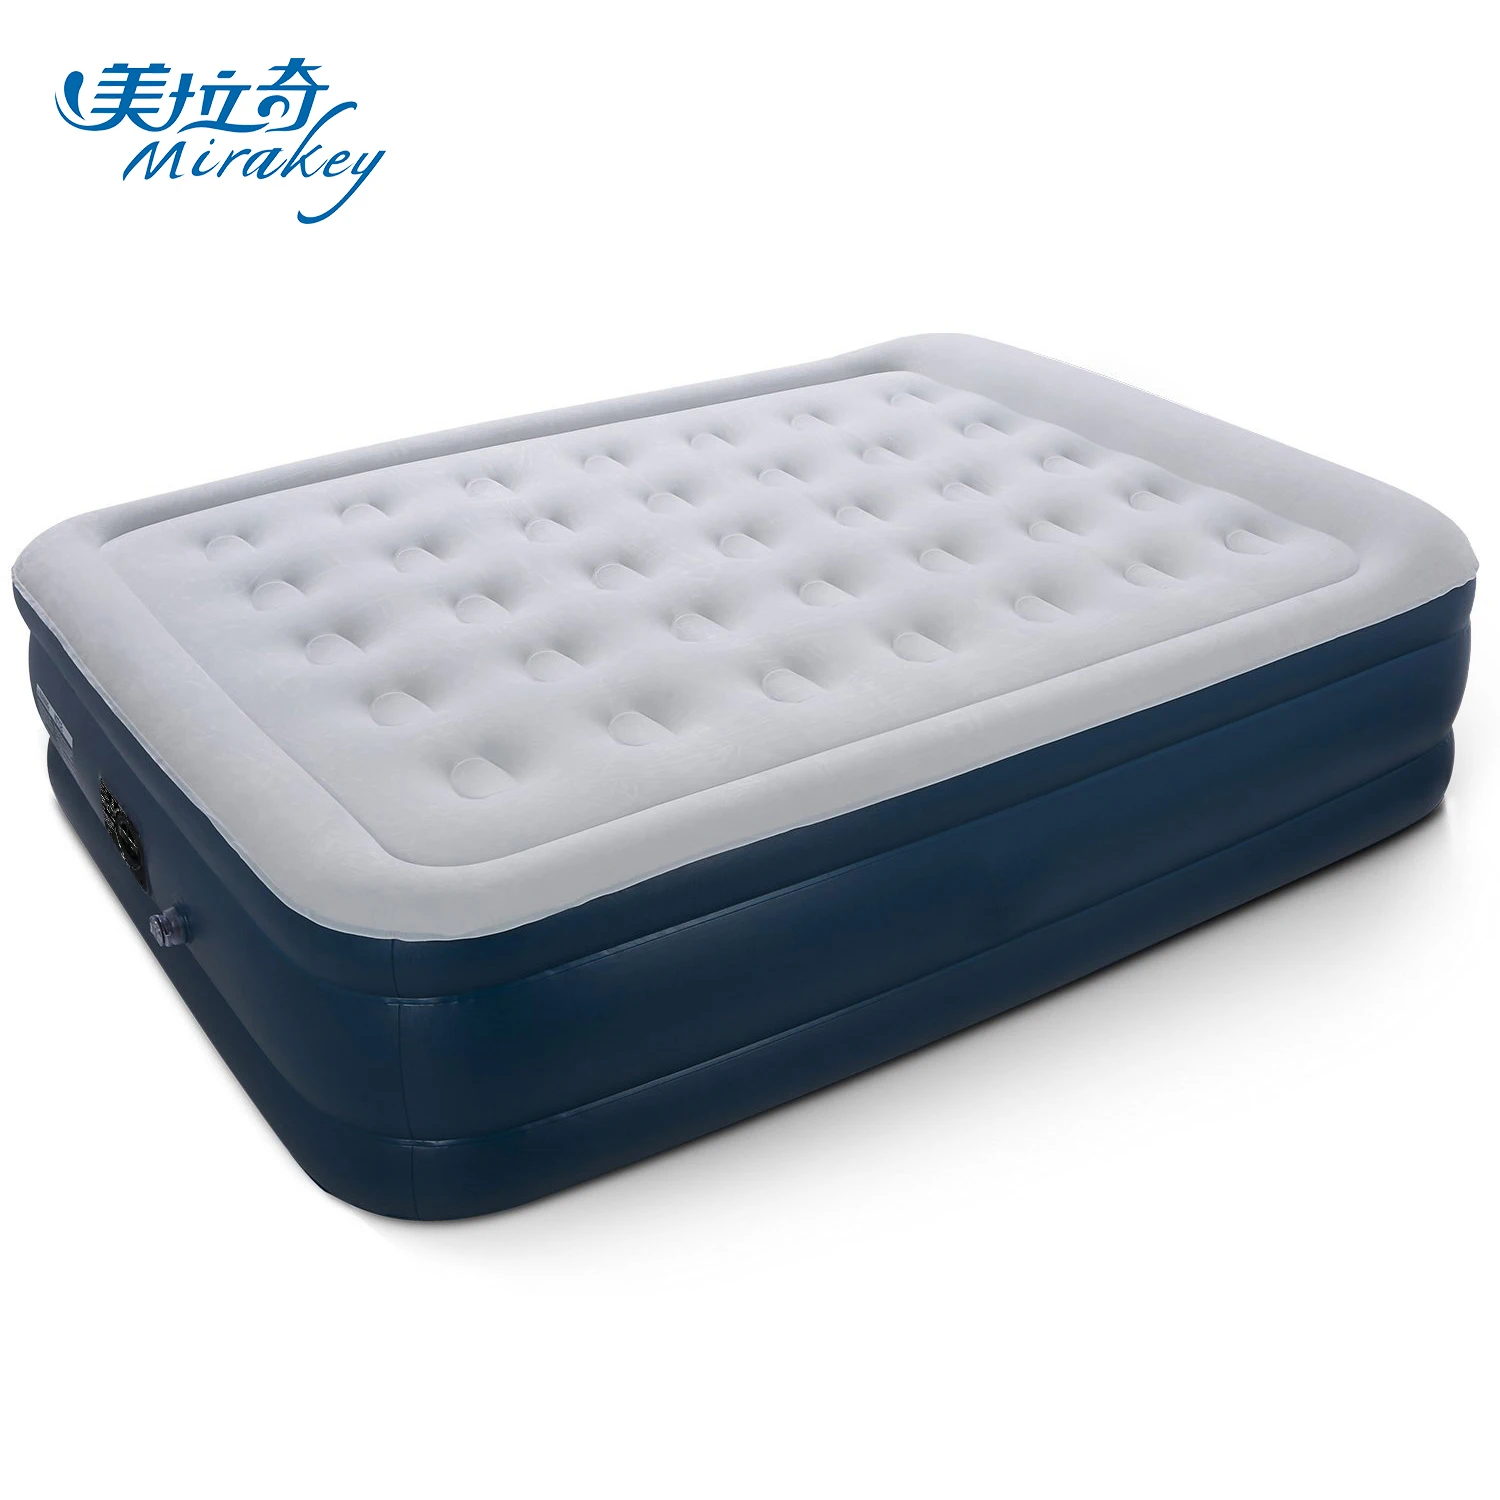 Mirakey airbed Raised queen size custom air bed custom inflatable mattress with electric pump with bulit-in pillow